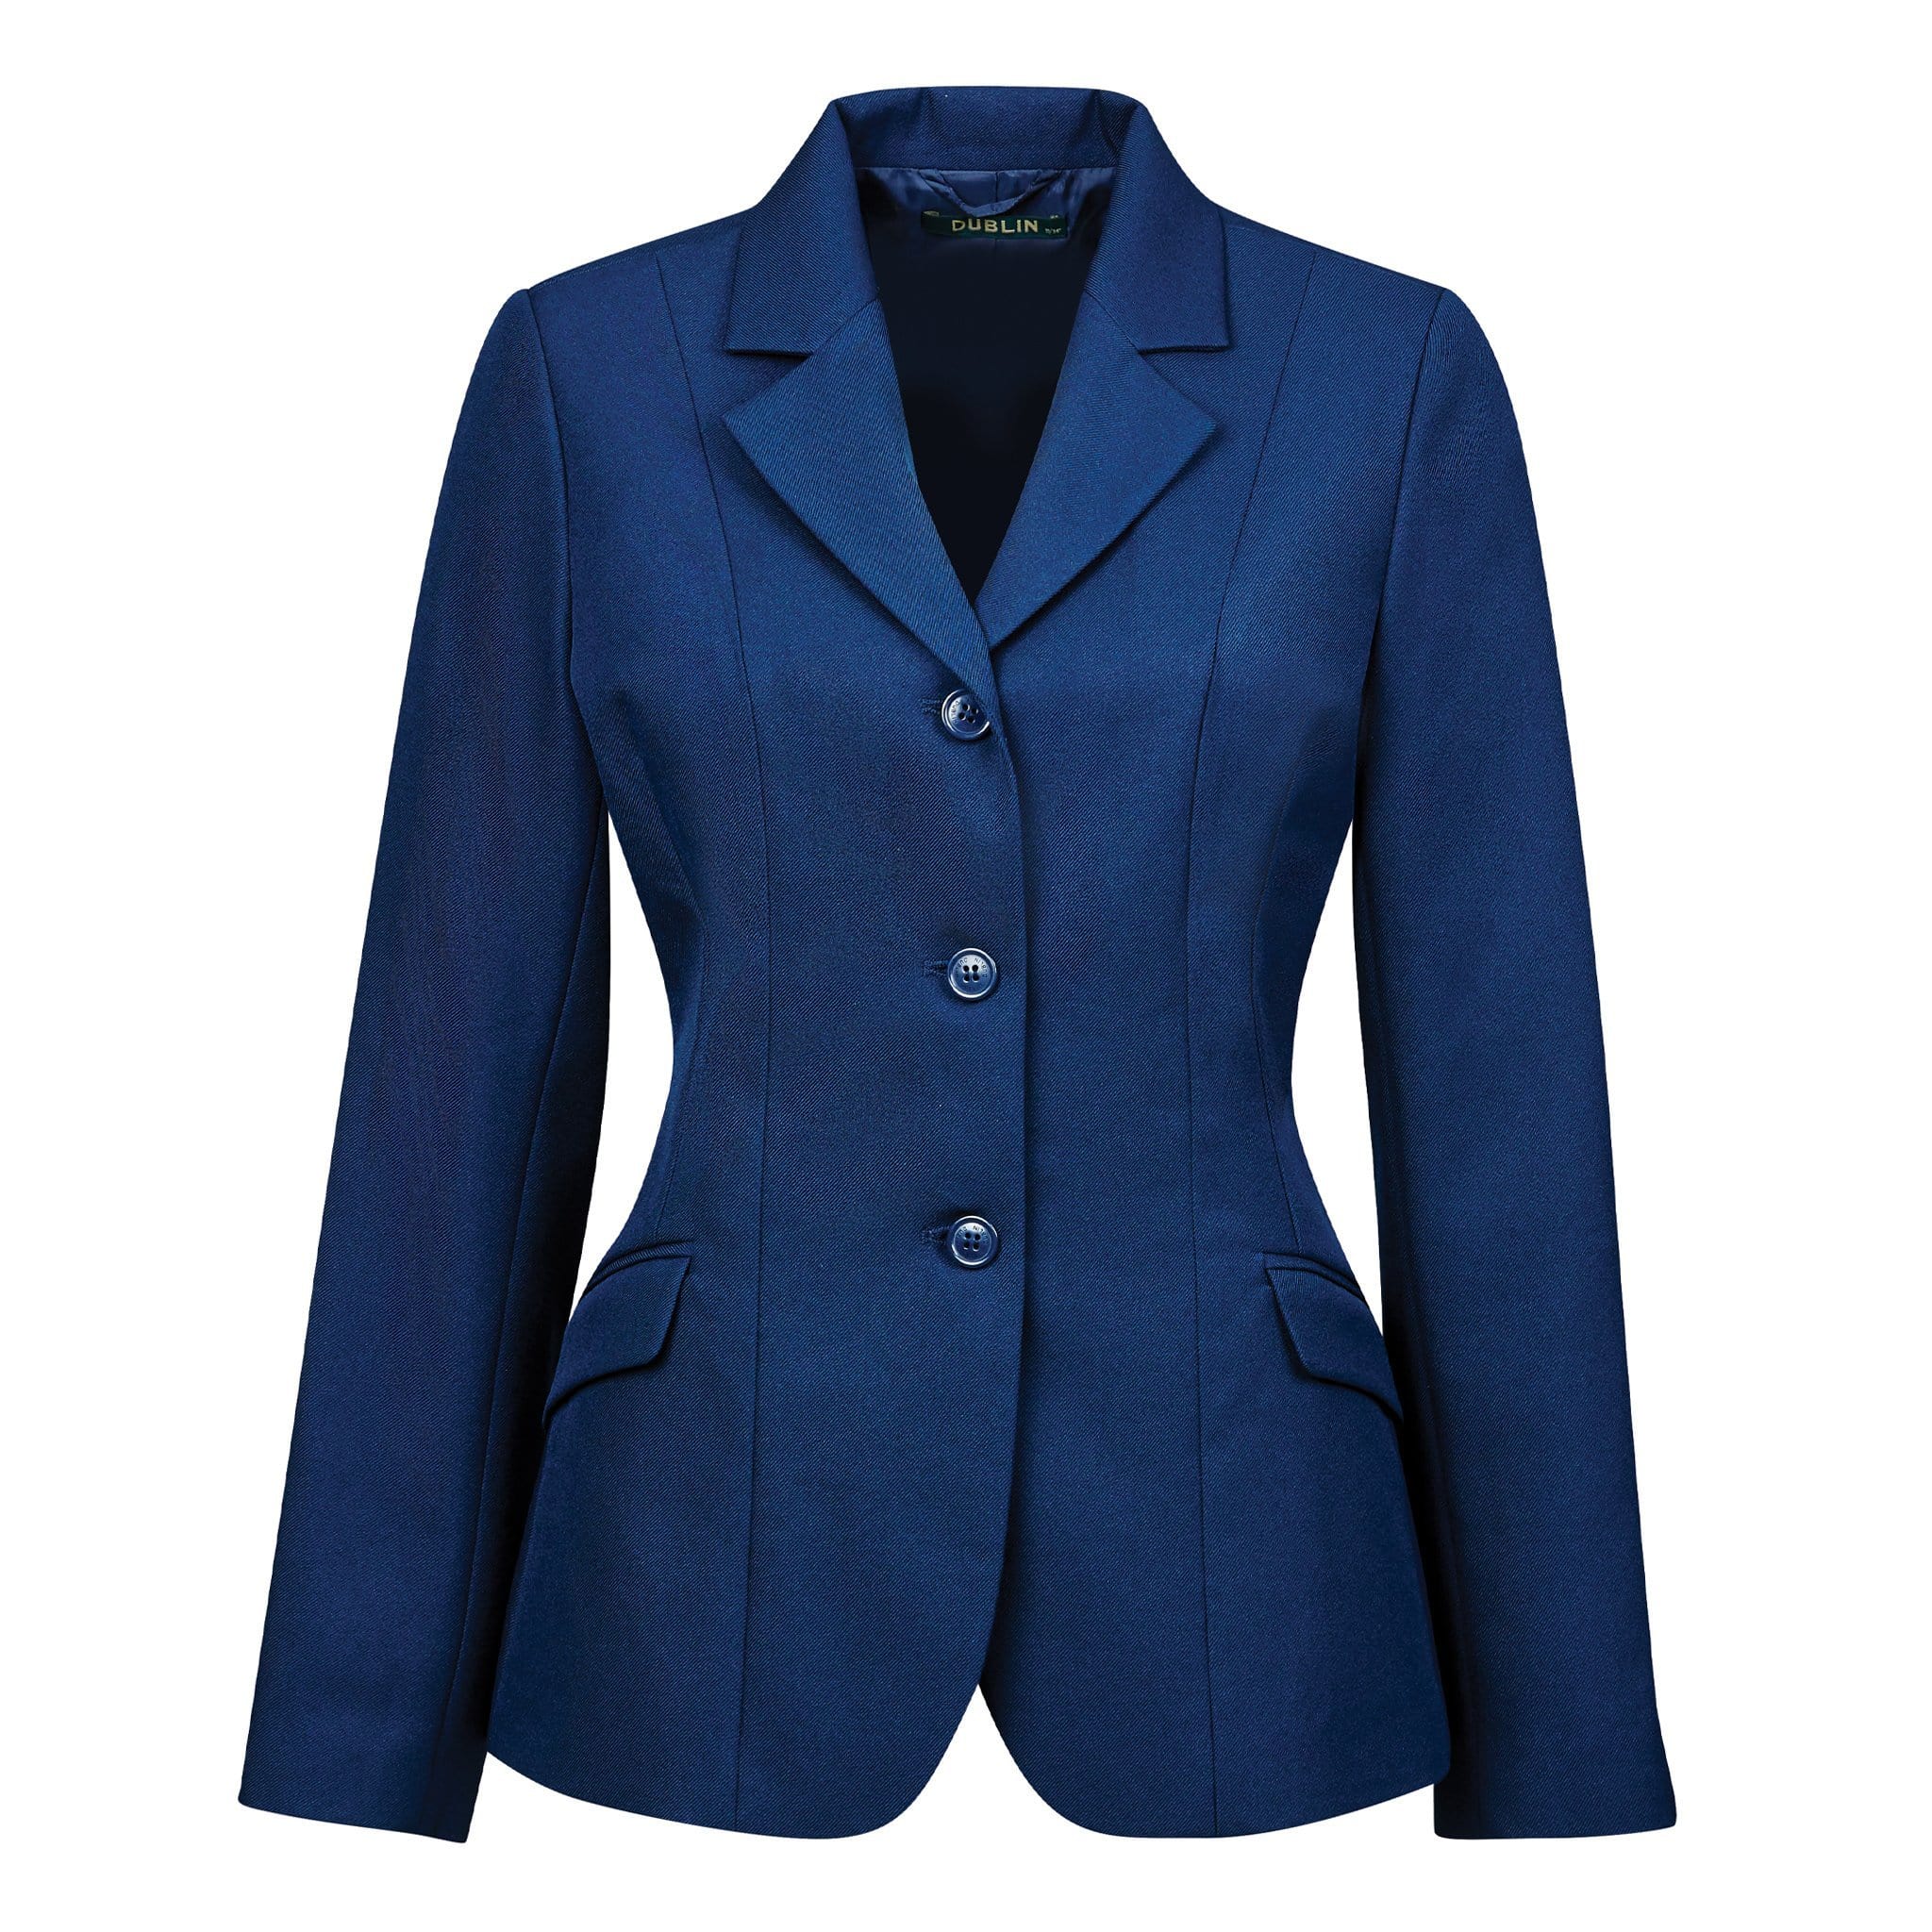 Dublin Girl's Ashby Competition Jacket 589367 Navy Blue Front